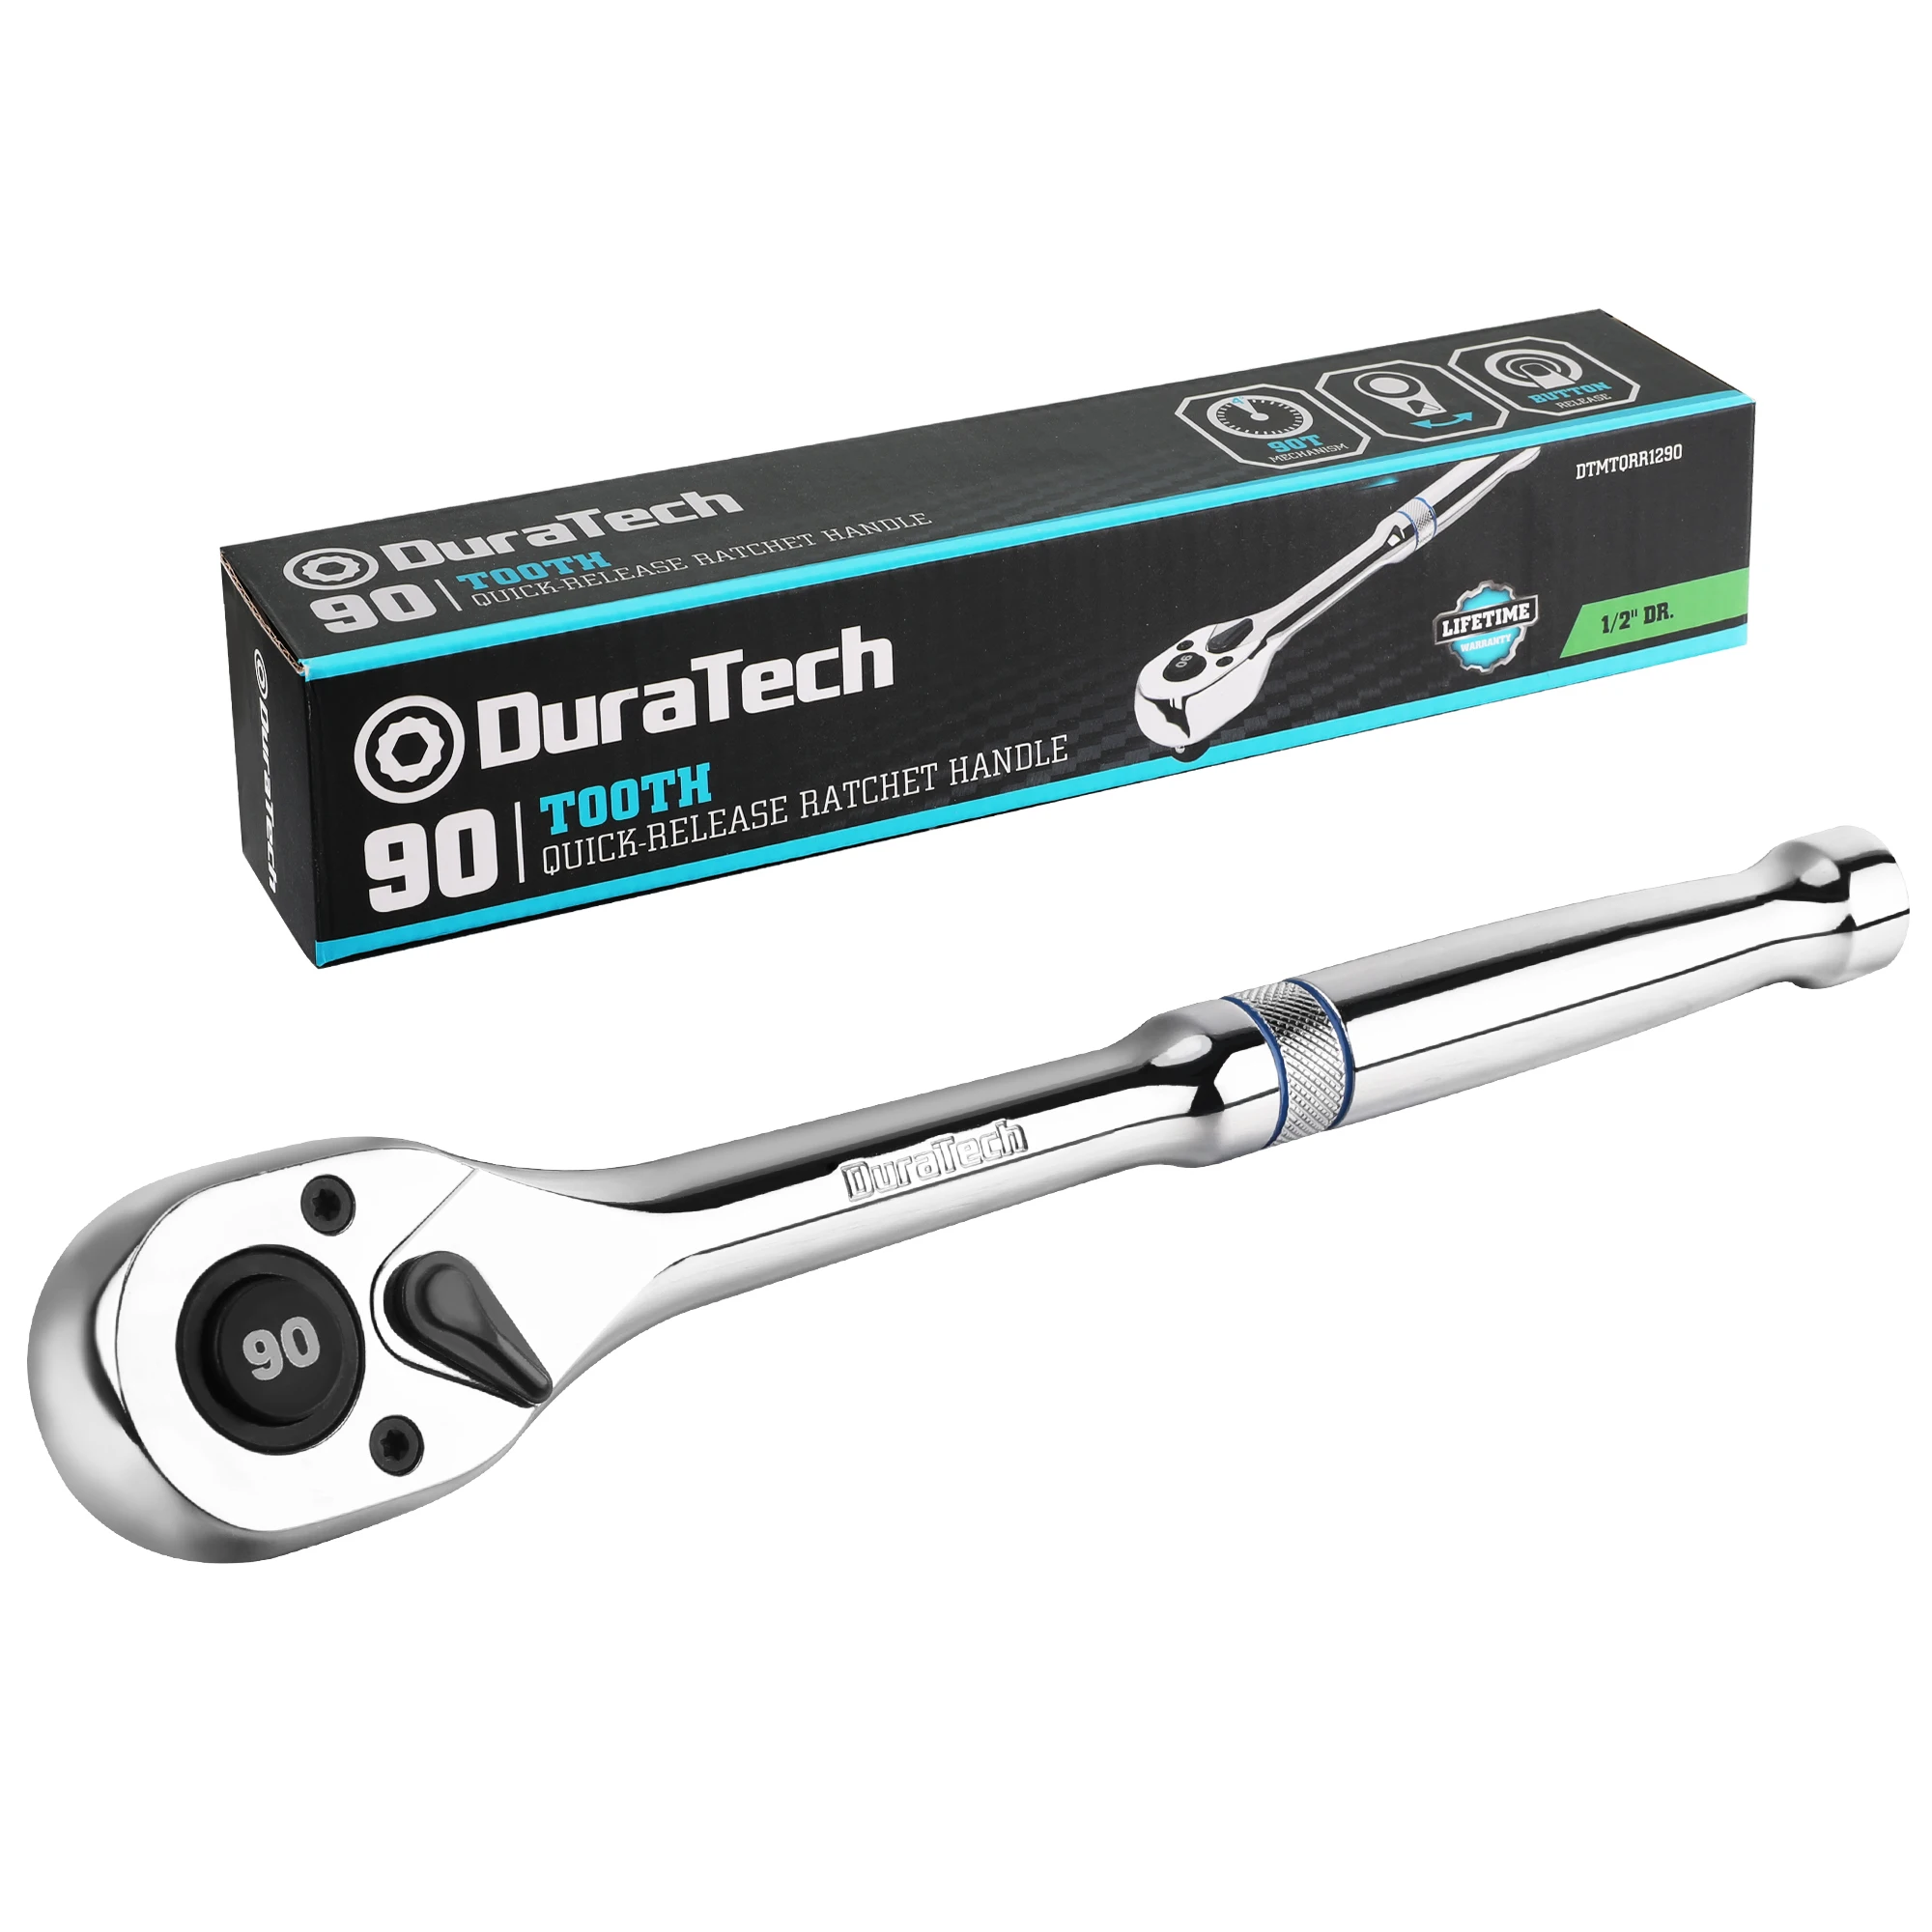 

DURATECH 1/2"Dr. 90-Tooth Quick-release Ratchet Handle Reversible Drive Ratchet Wrench Full Polished Home DIY Hand Tools